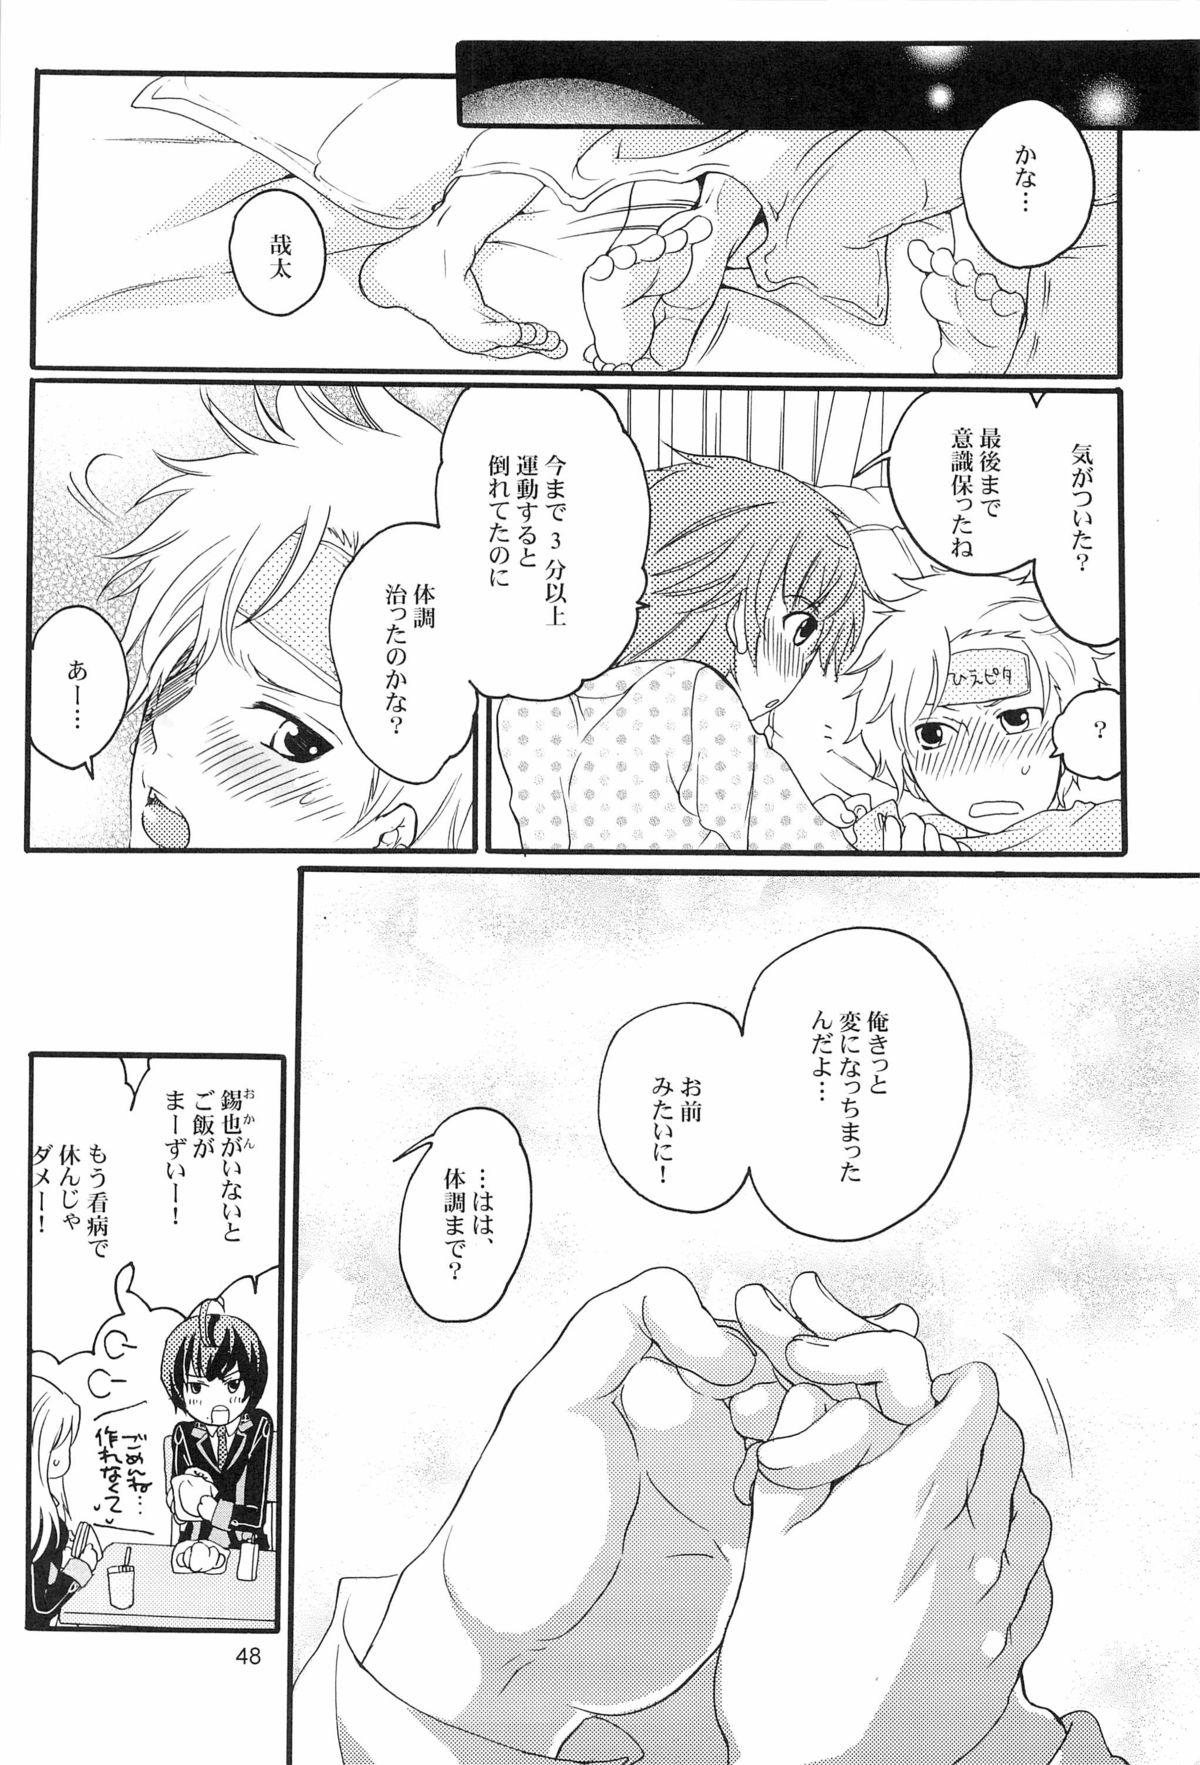 Whores DT Kouryakuhon - Starry sky Cocksucking - Page 48